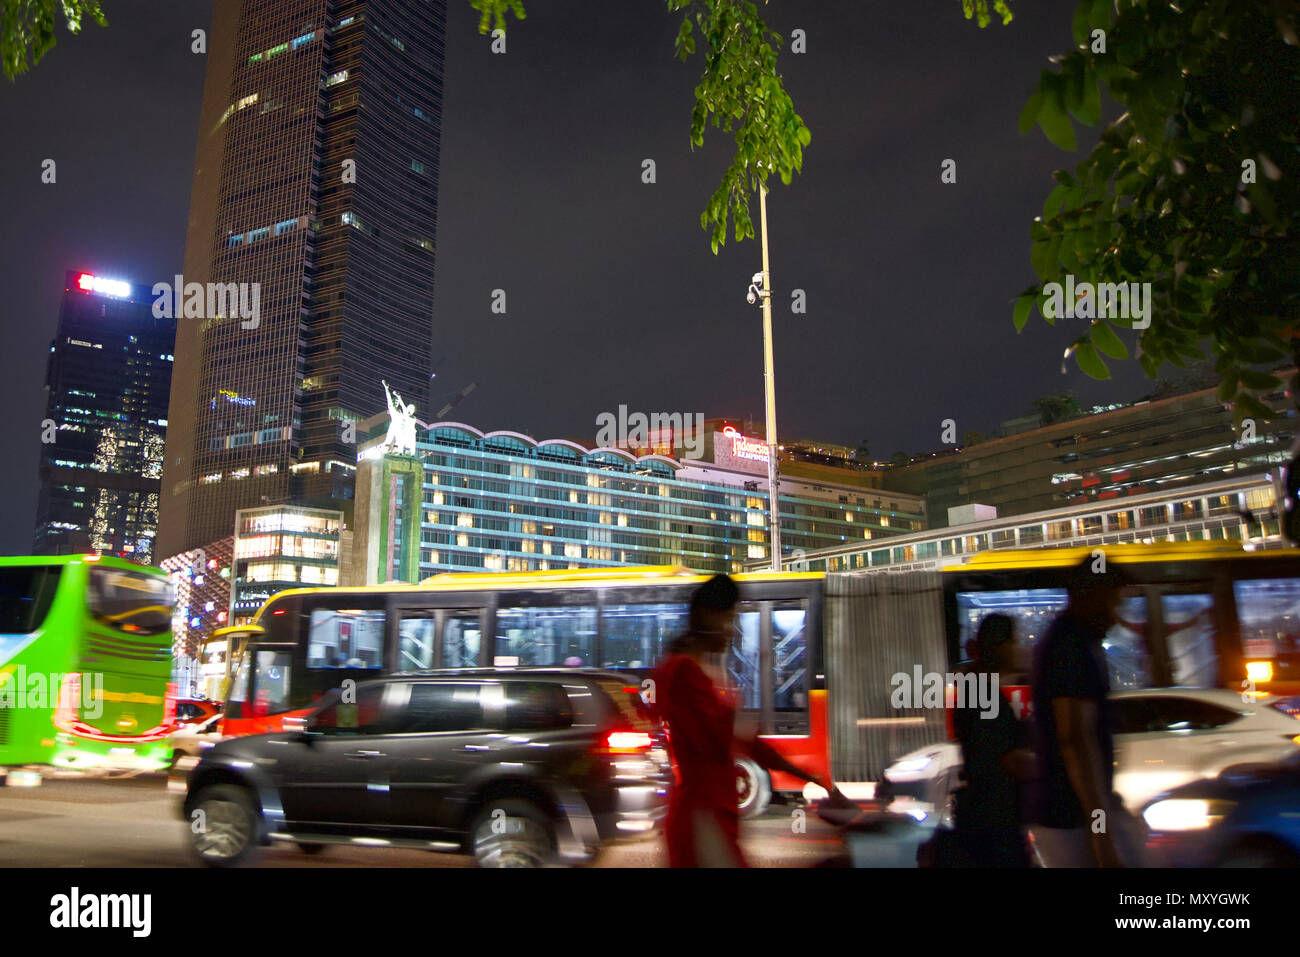 Pedestrians walk at night on roadside of Thamrin Street, Jakarta, with buses, cars, the welcome statue, and buildings in the background. Stock Photo